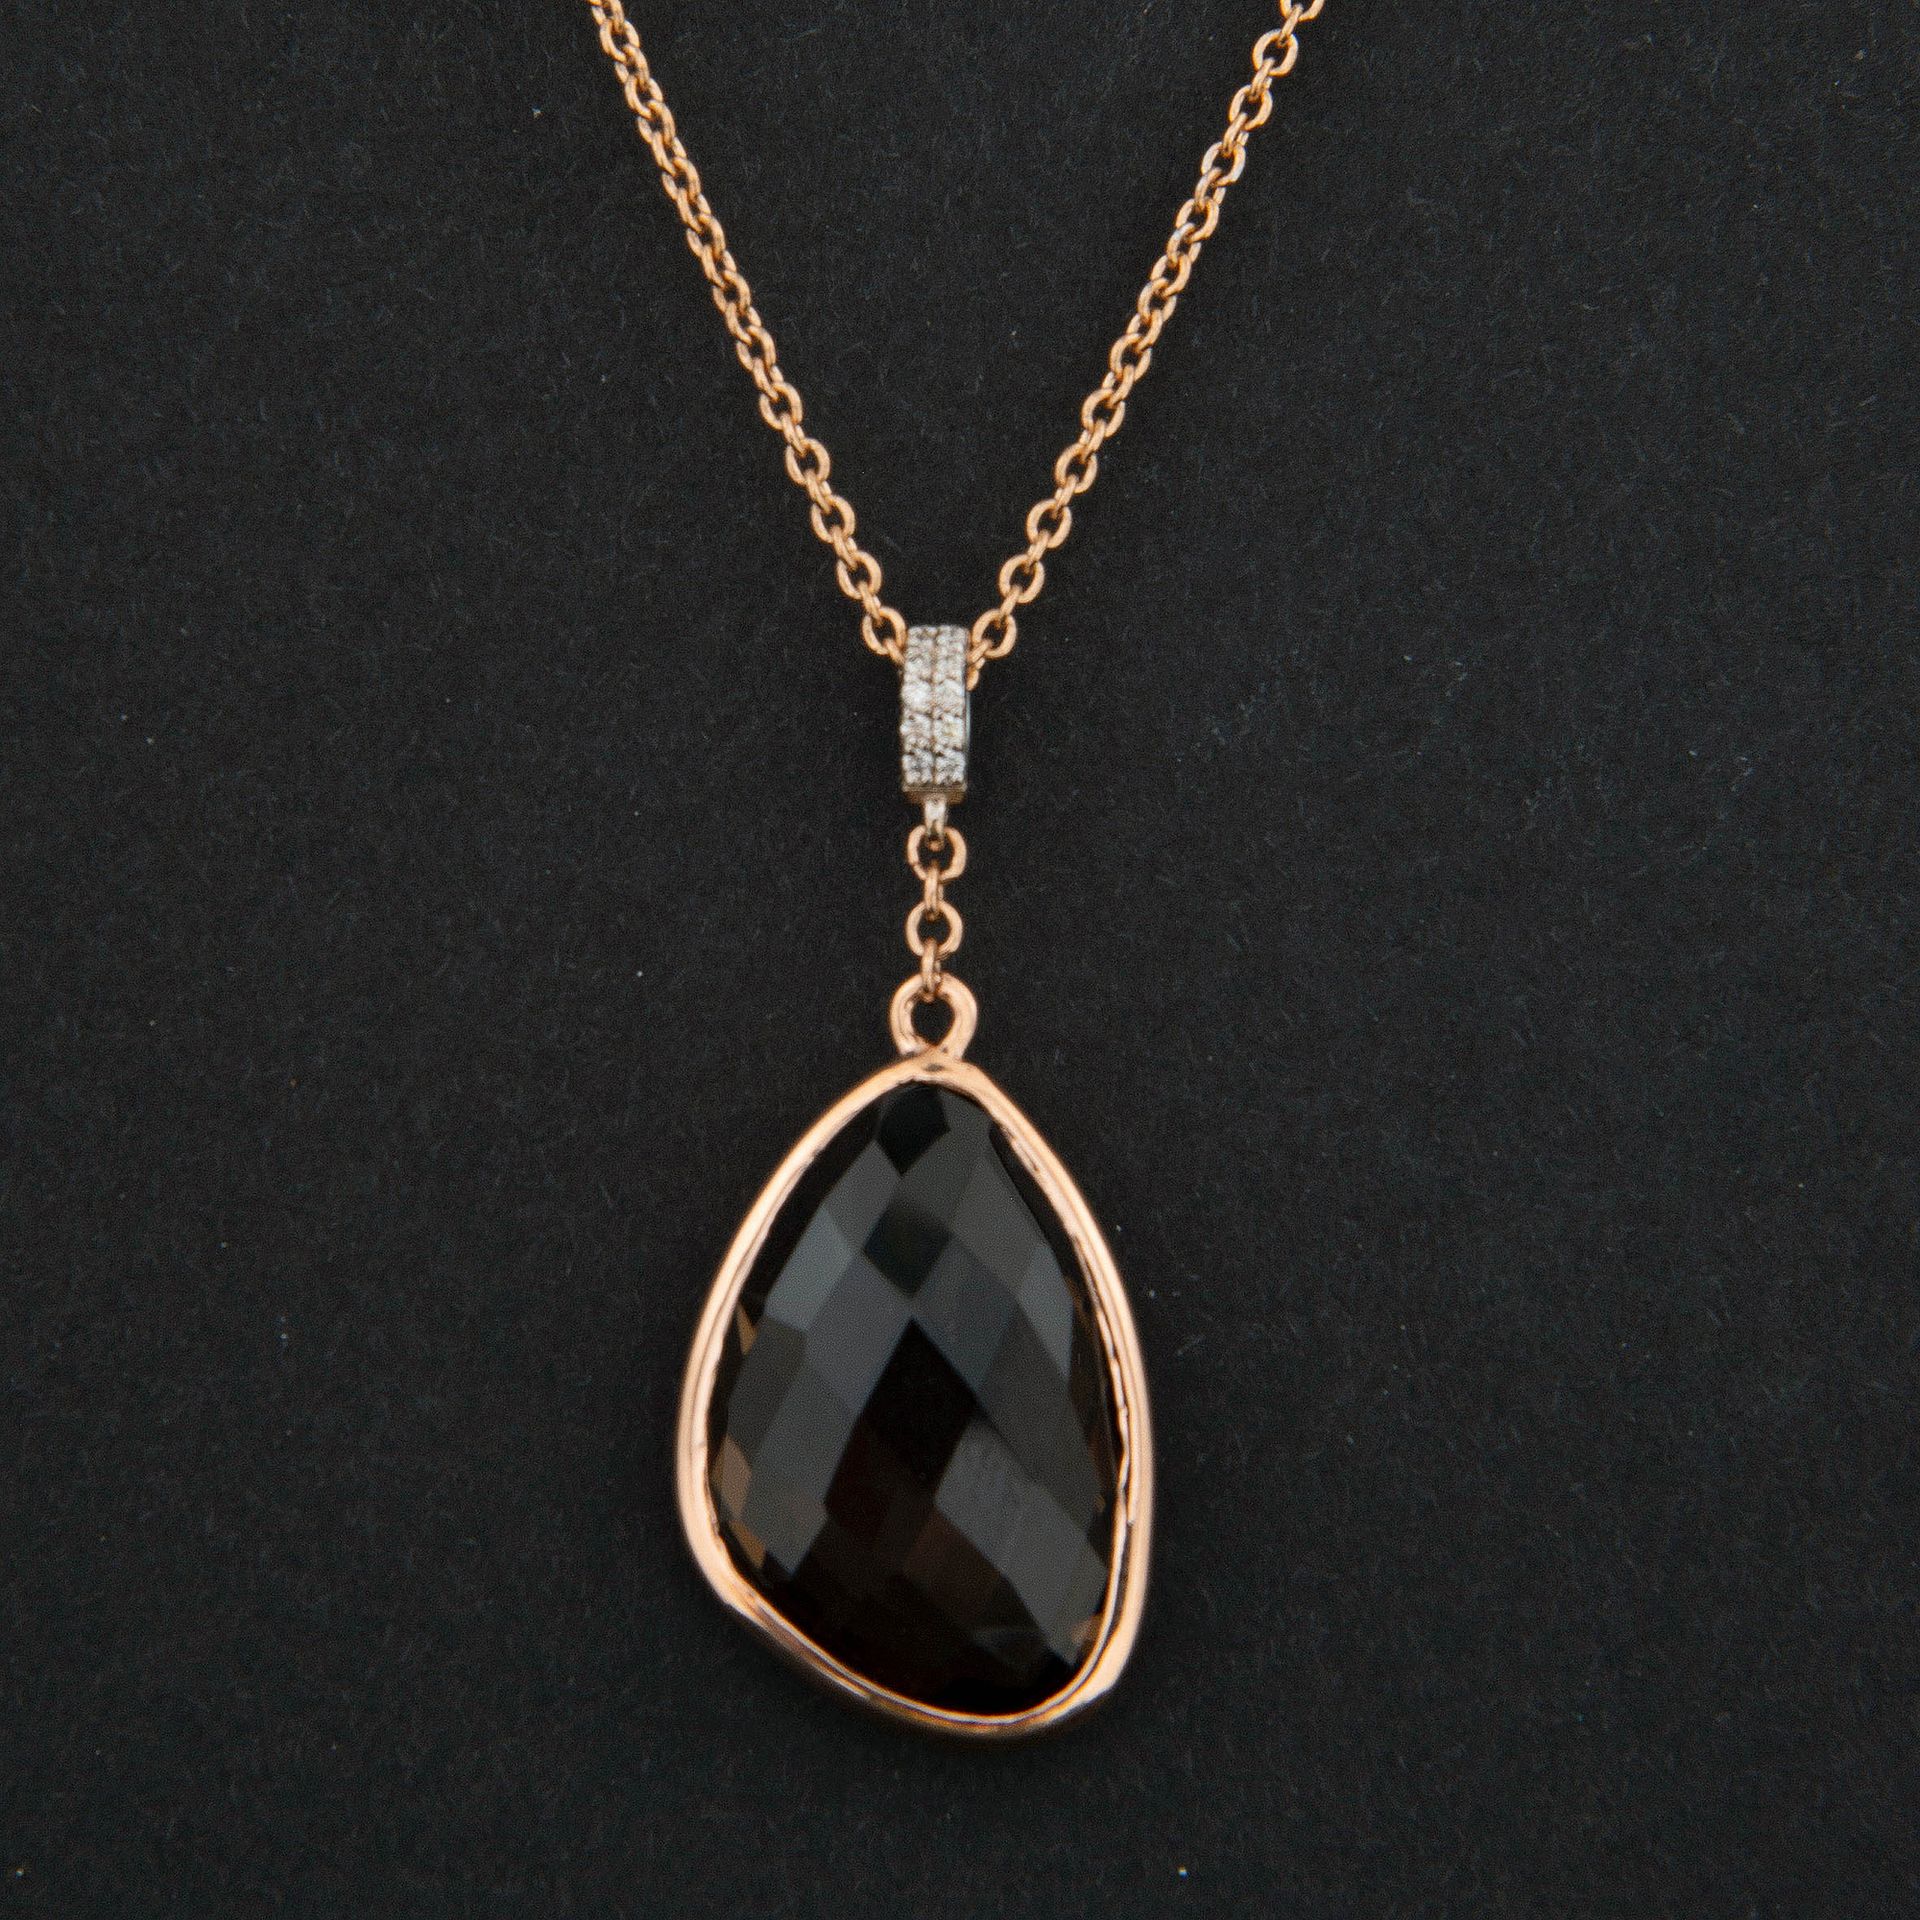 Null Chain and pendant in 18k pink gold set with smoky quartz and 0.50 carat bri&hellip;